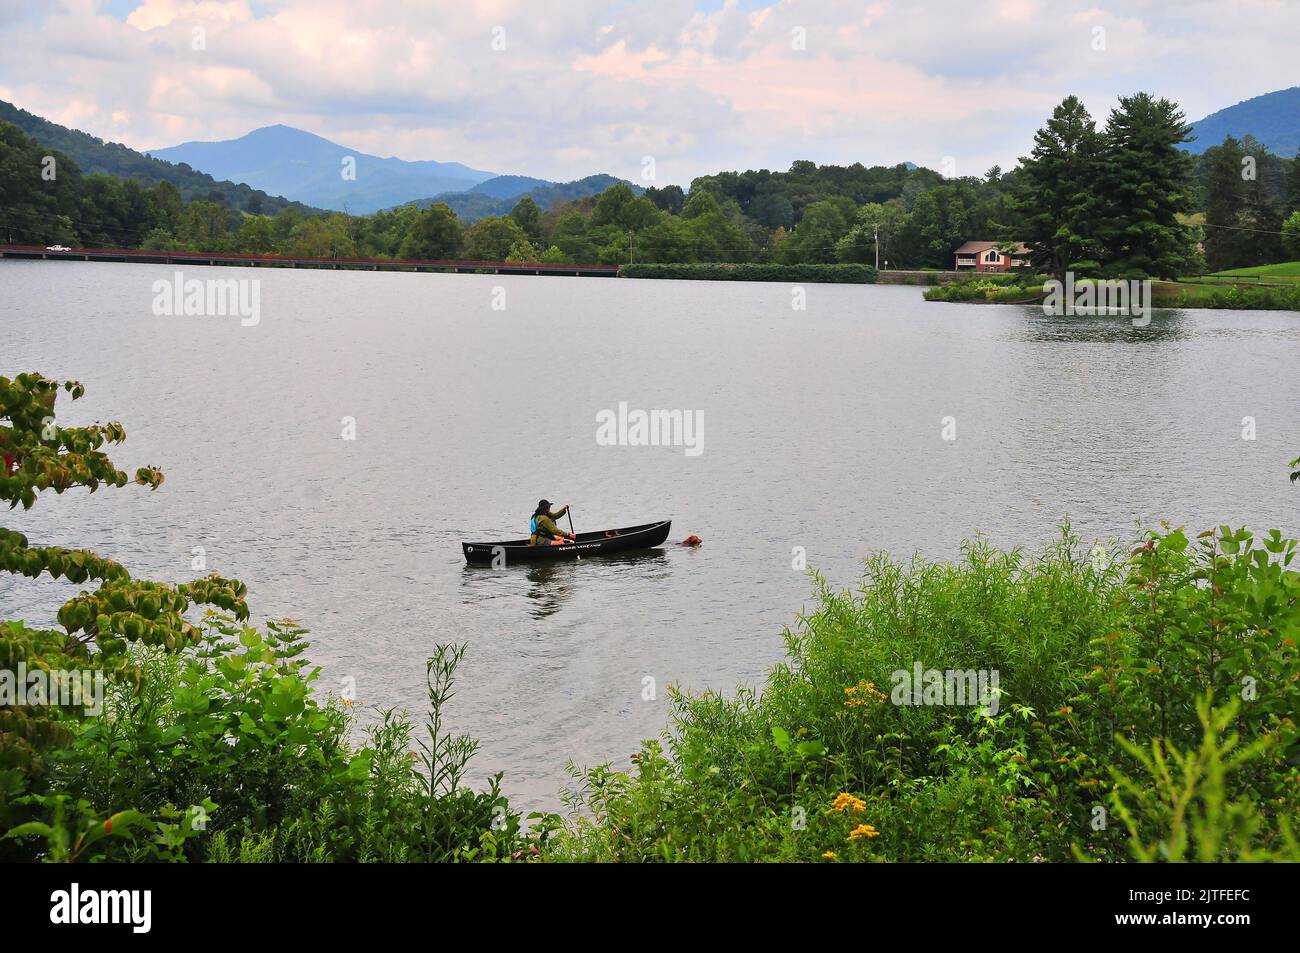 A canoer paddles the tranquil Lake Junaluska while her dog swims in front of it for exercise near Waynesville, North Carolina. Stock Photo